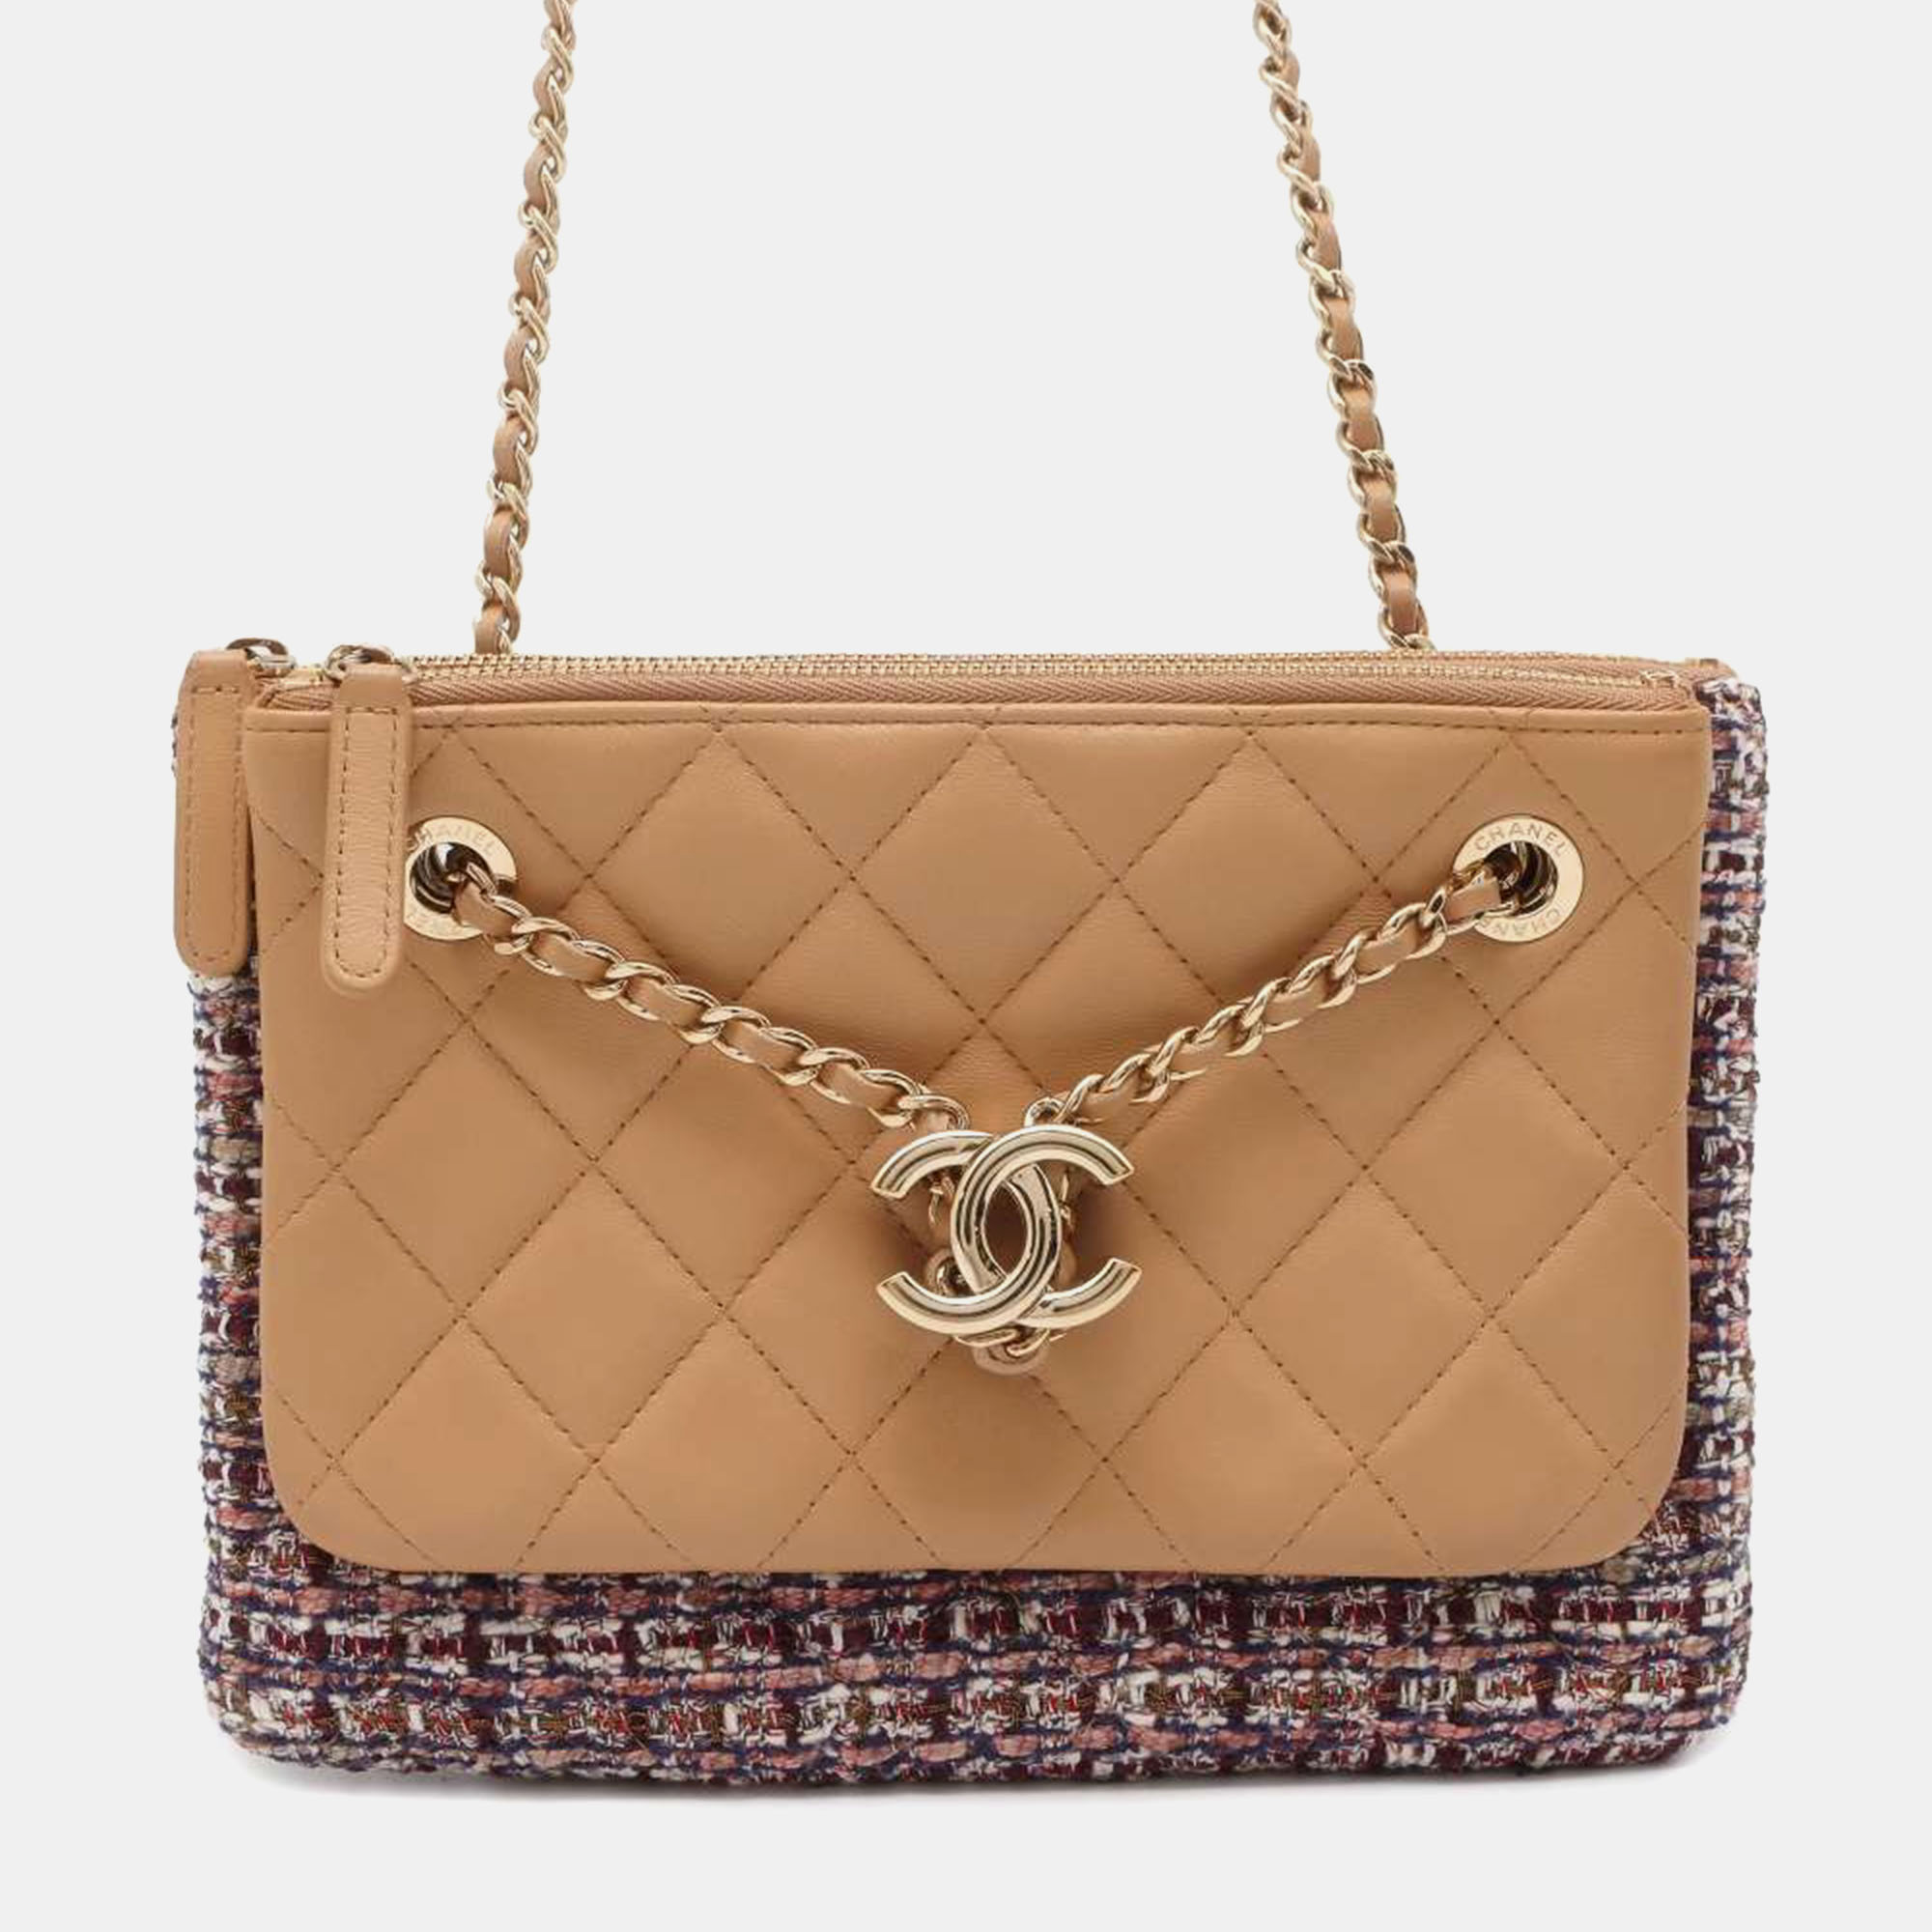 

Chanel Beige/Multicolor Leather Tweed Chain Shoulder Pouch Bag